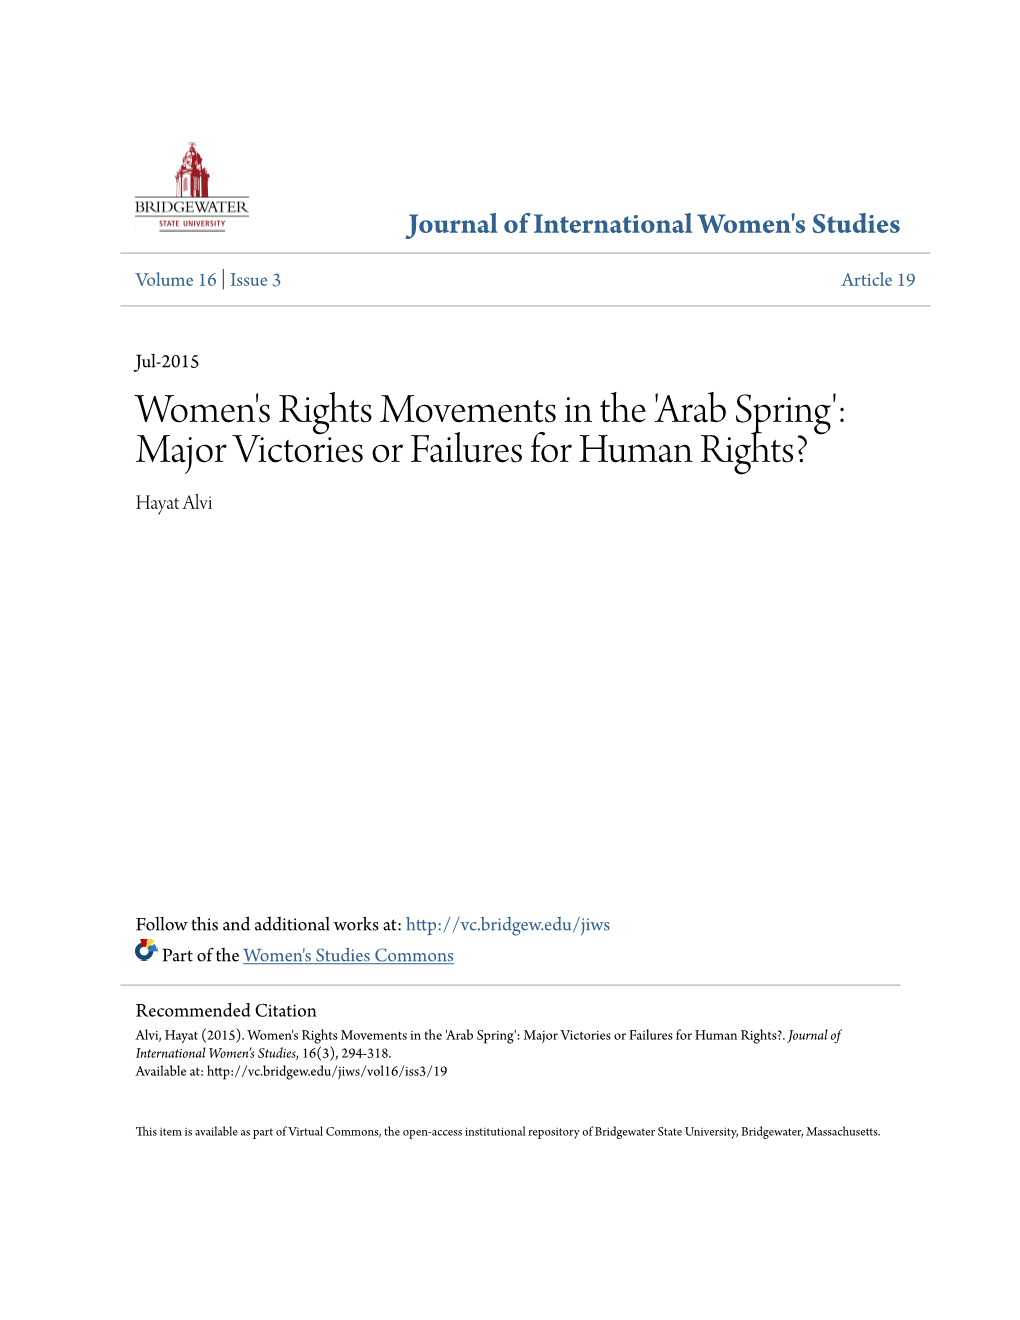 Arab Spring': Major Victories Or Failures for Human Rights? Hayat Alvi